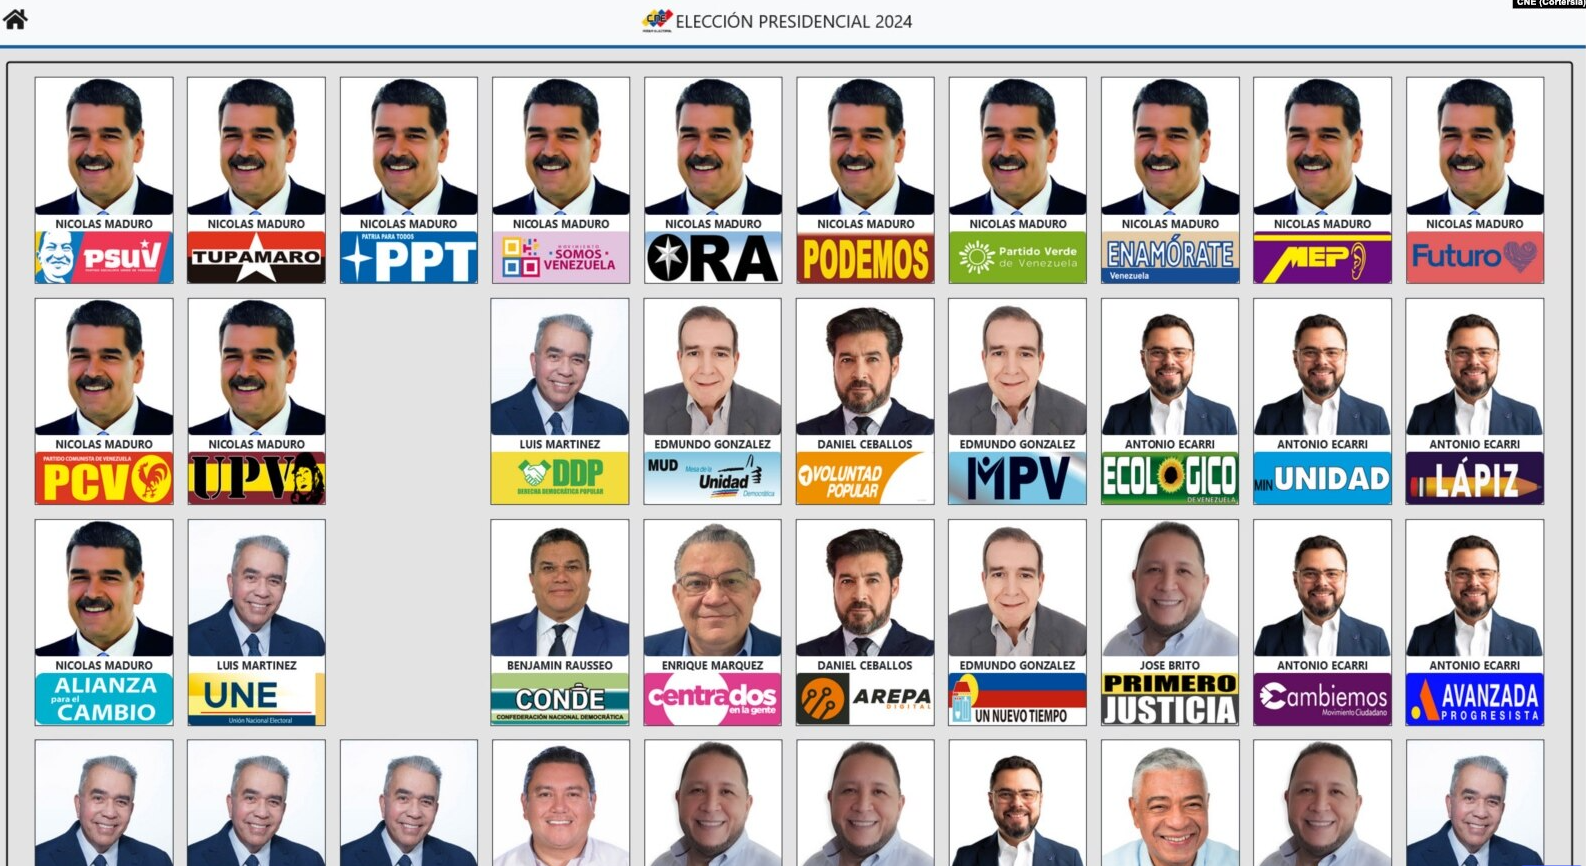 Nicolas Maduro’s face appears 13 times in the electoral ballot in Venezuela. Why?